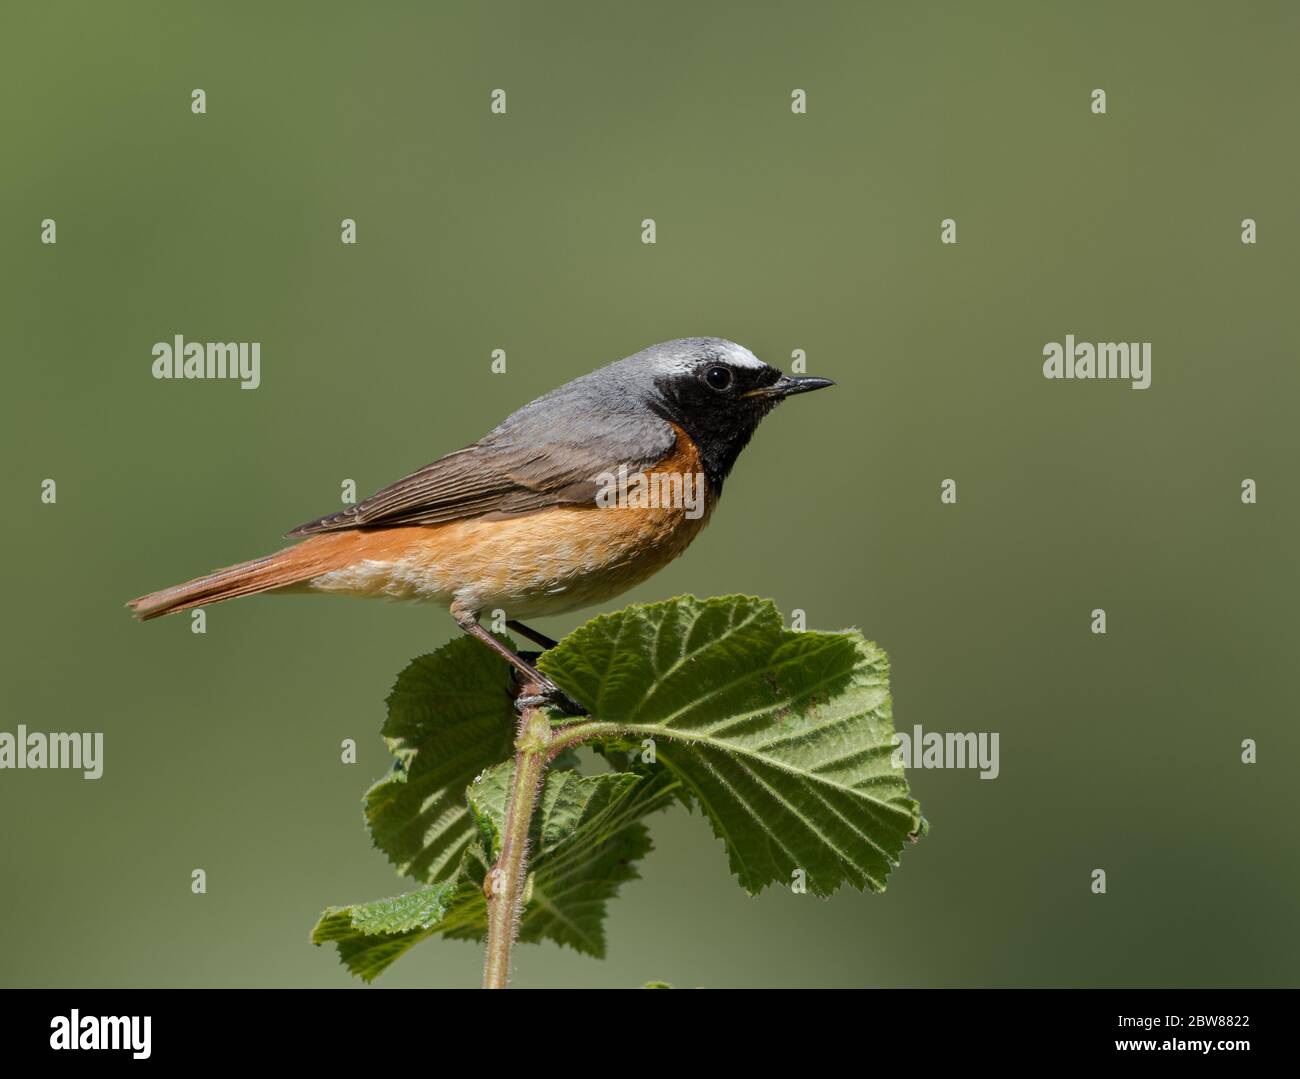 A male Common Redstart (Phoenicurus phoenicurus) in breeding plumage perched in front a clean background. Taken on Cleeve Hill, Gloucestershire, UK. Stock Photo